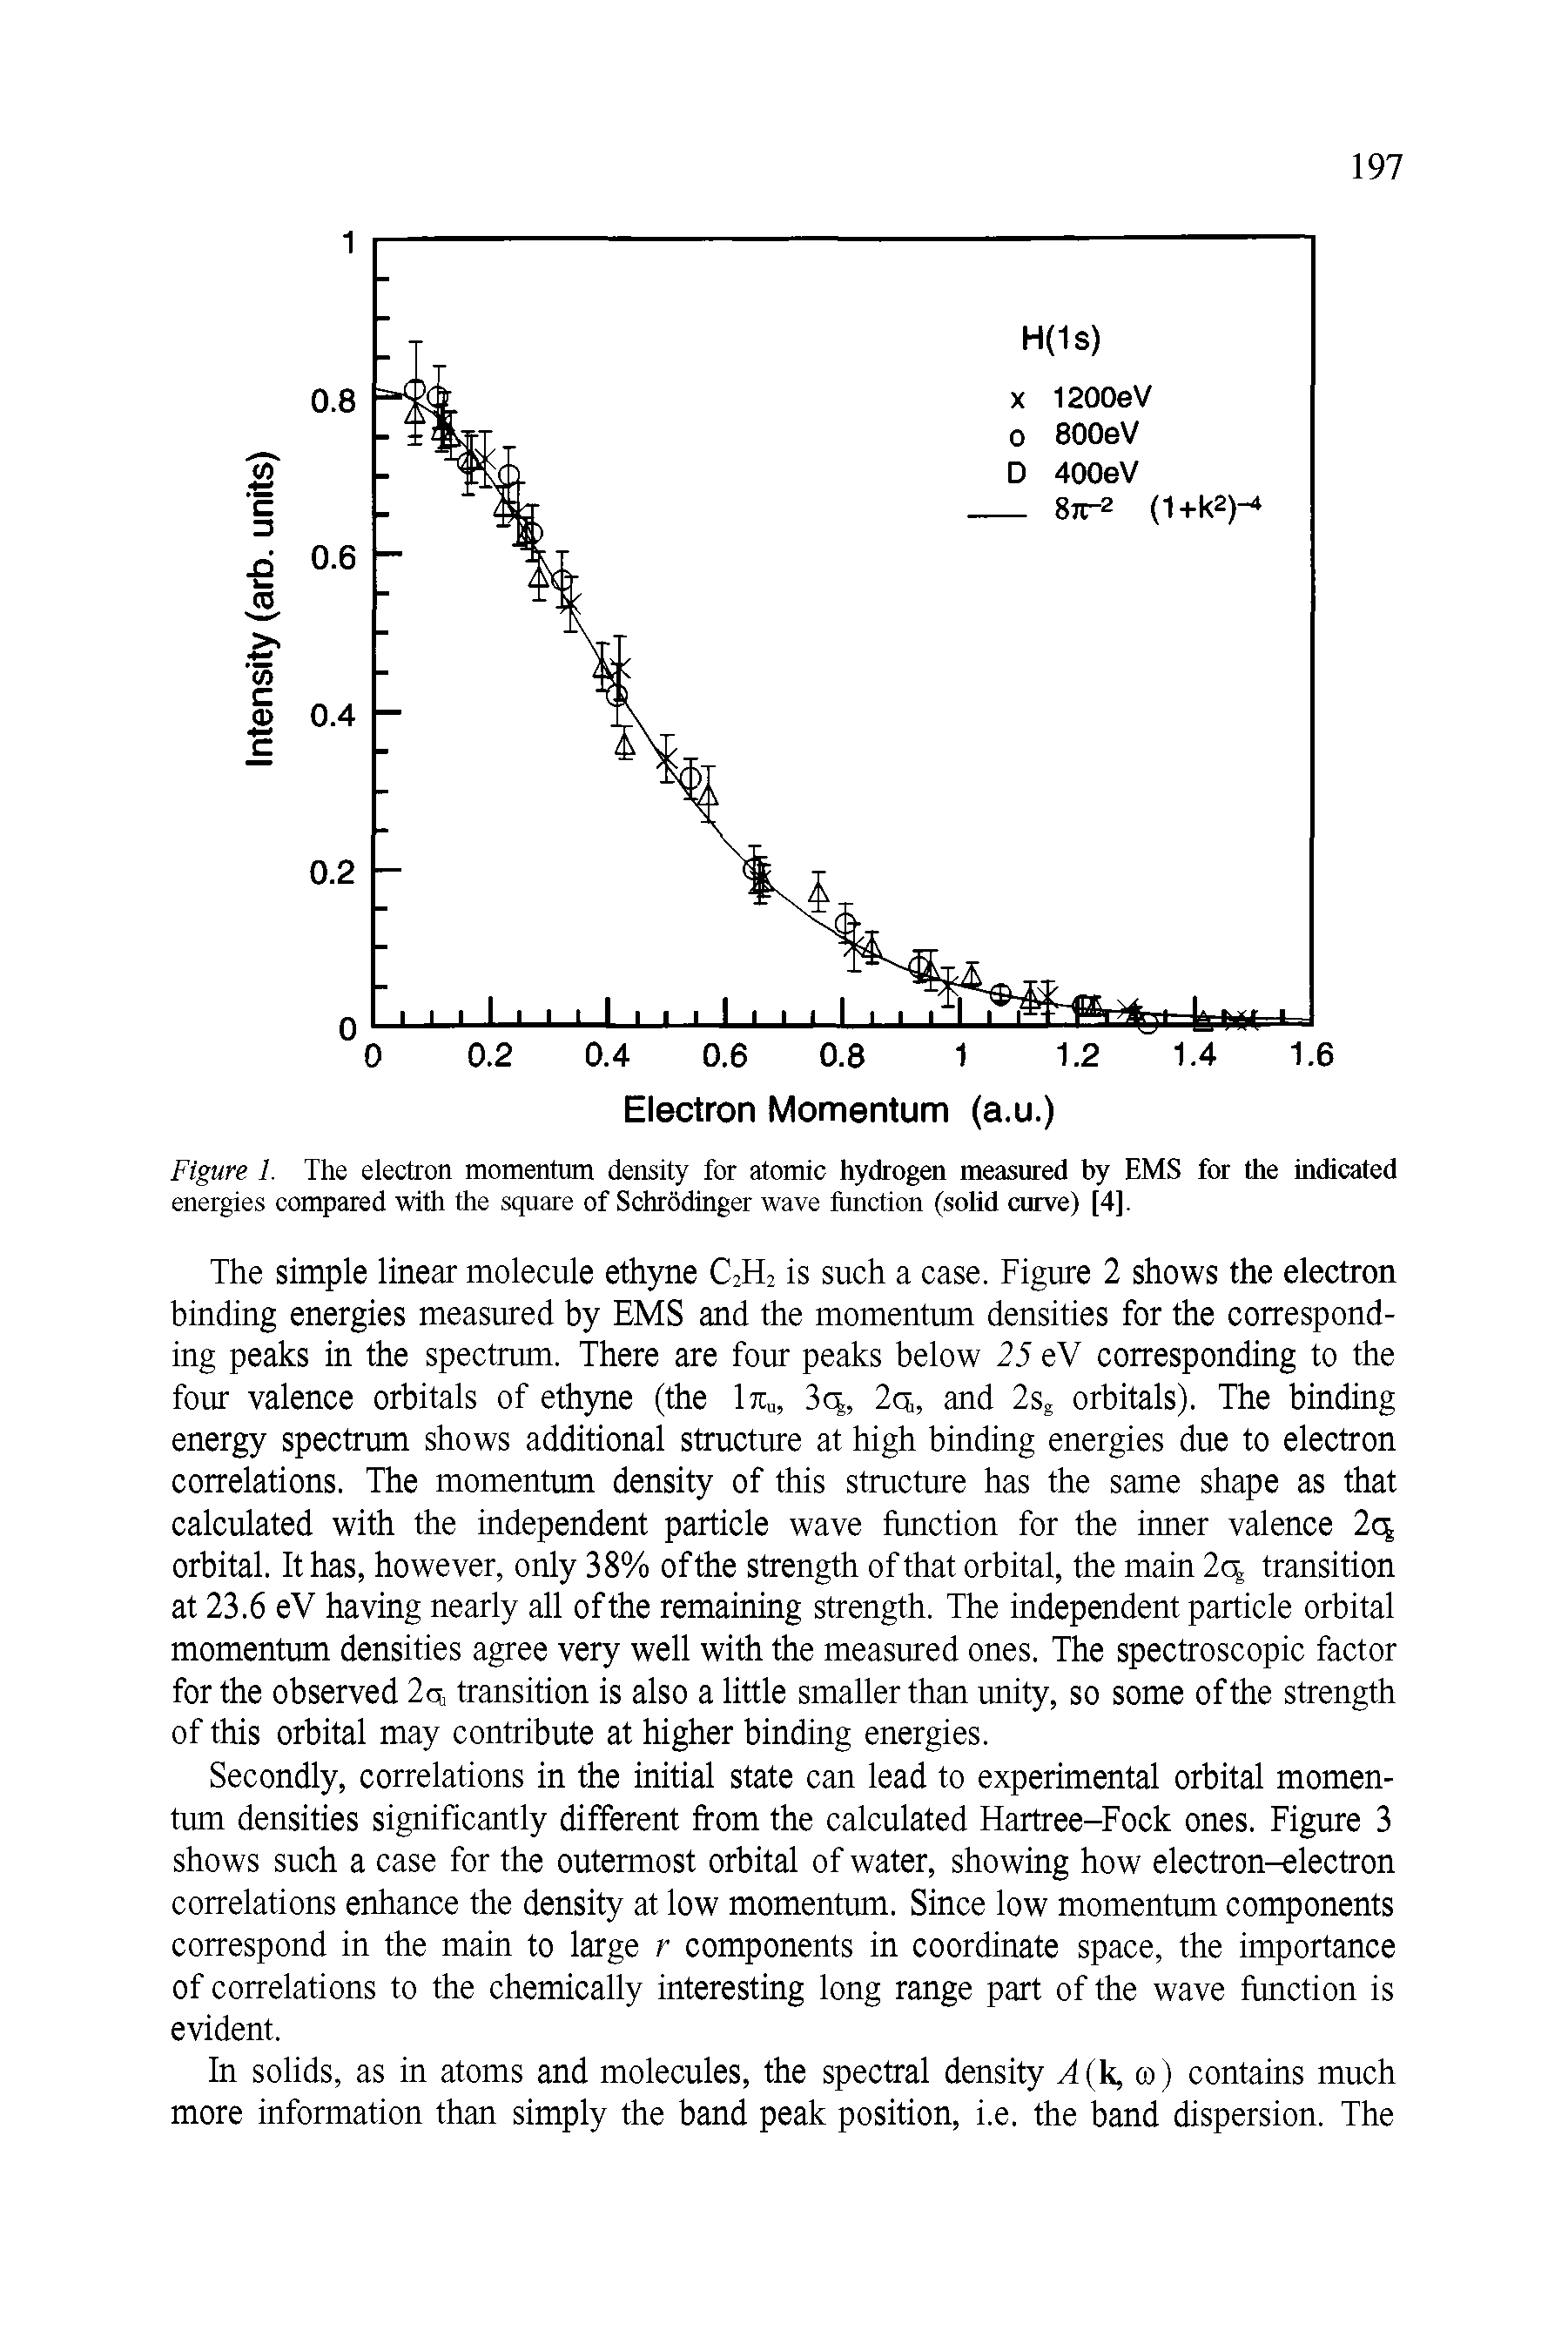 Figure 1. The electron momentum density for atomic hydrogen measured by EMS for the indicated energies compared with the square of Schrodinger wave function (solid curve) [4].